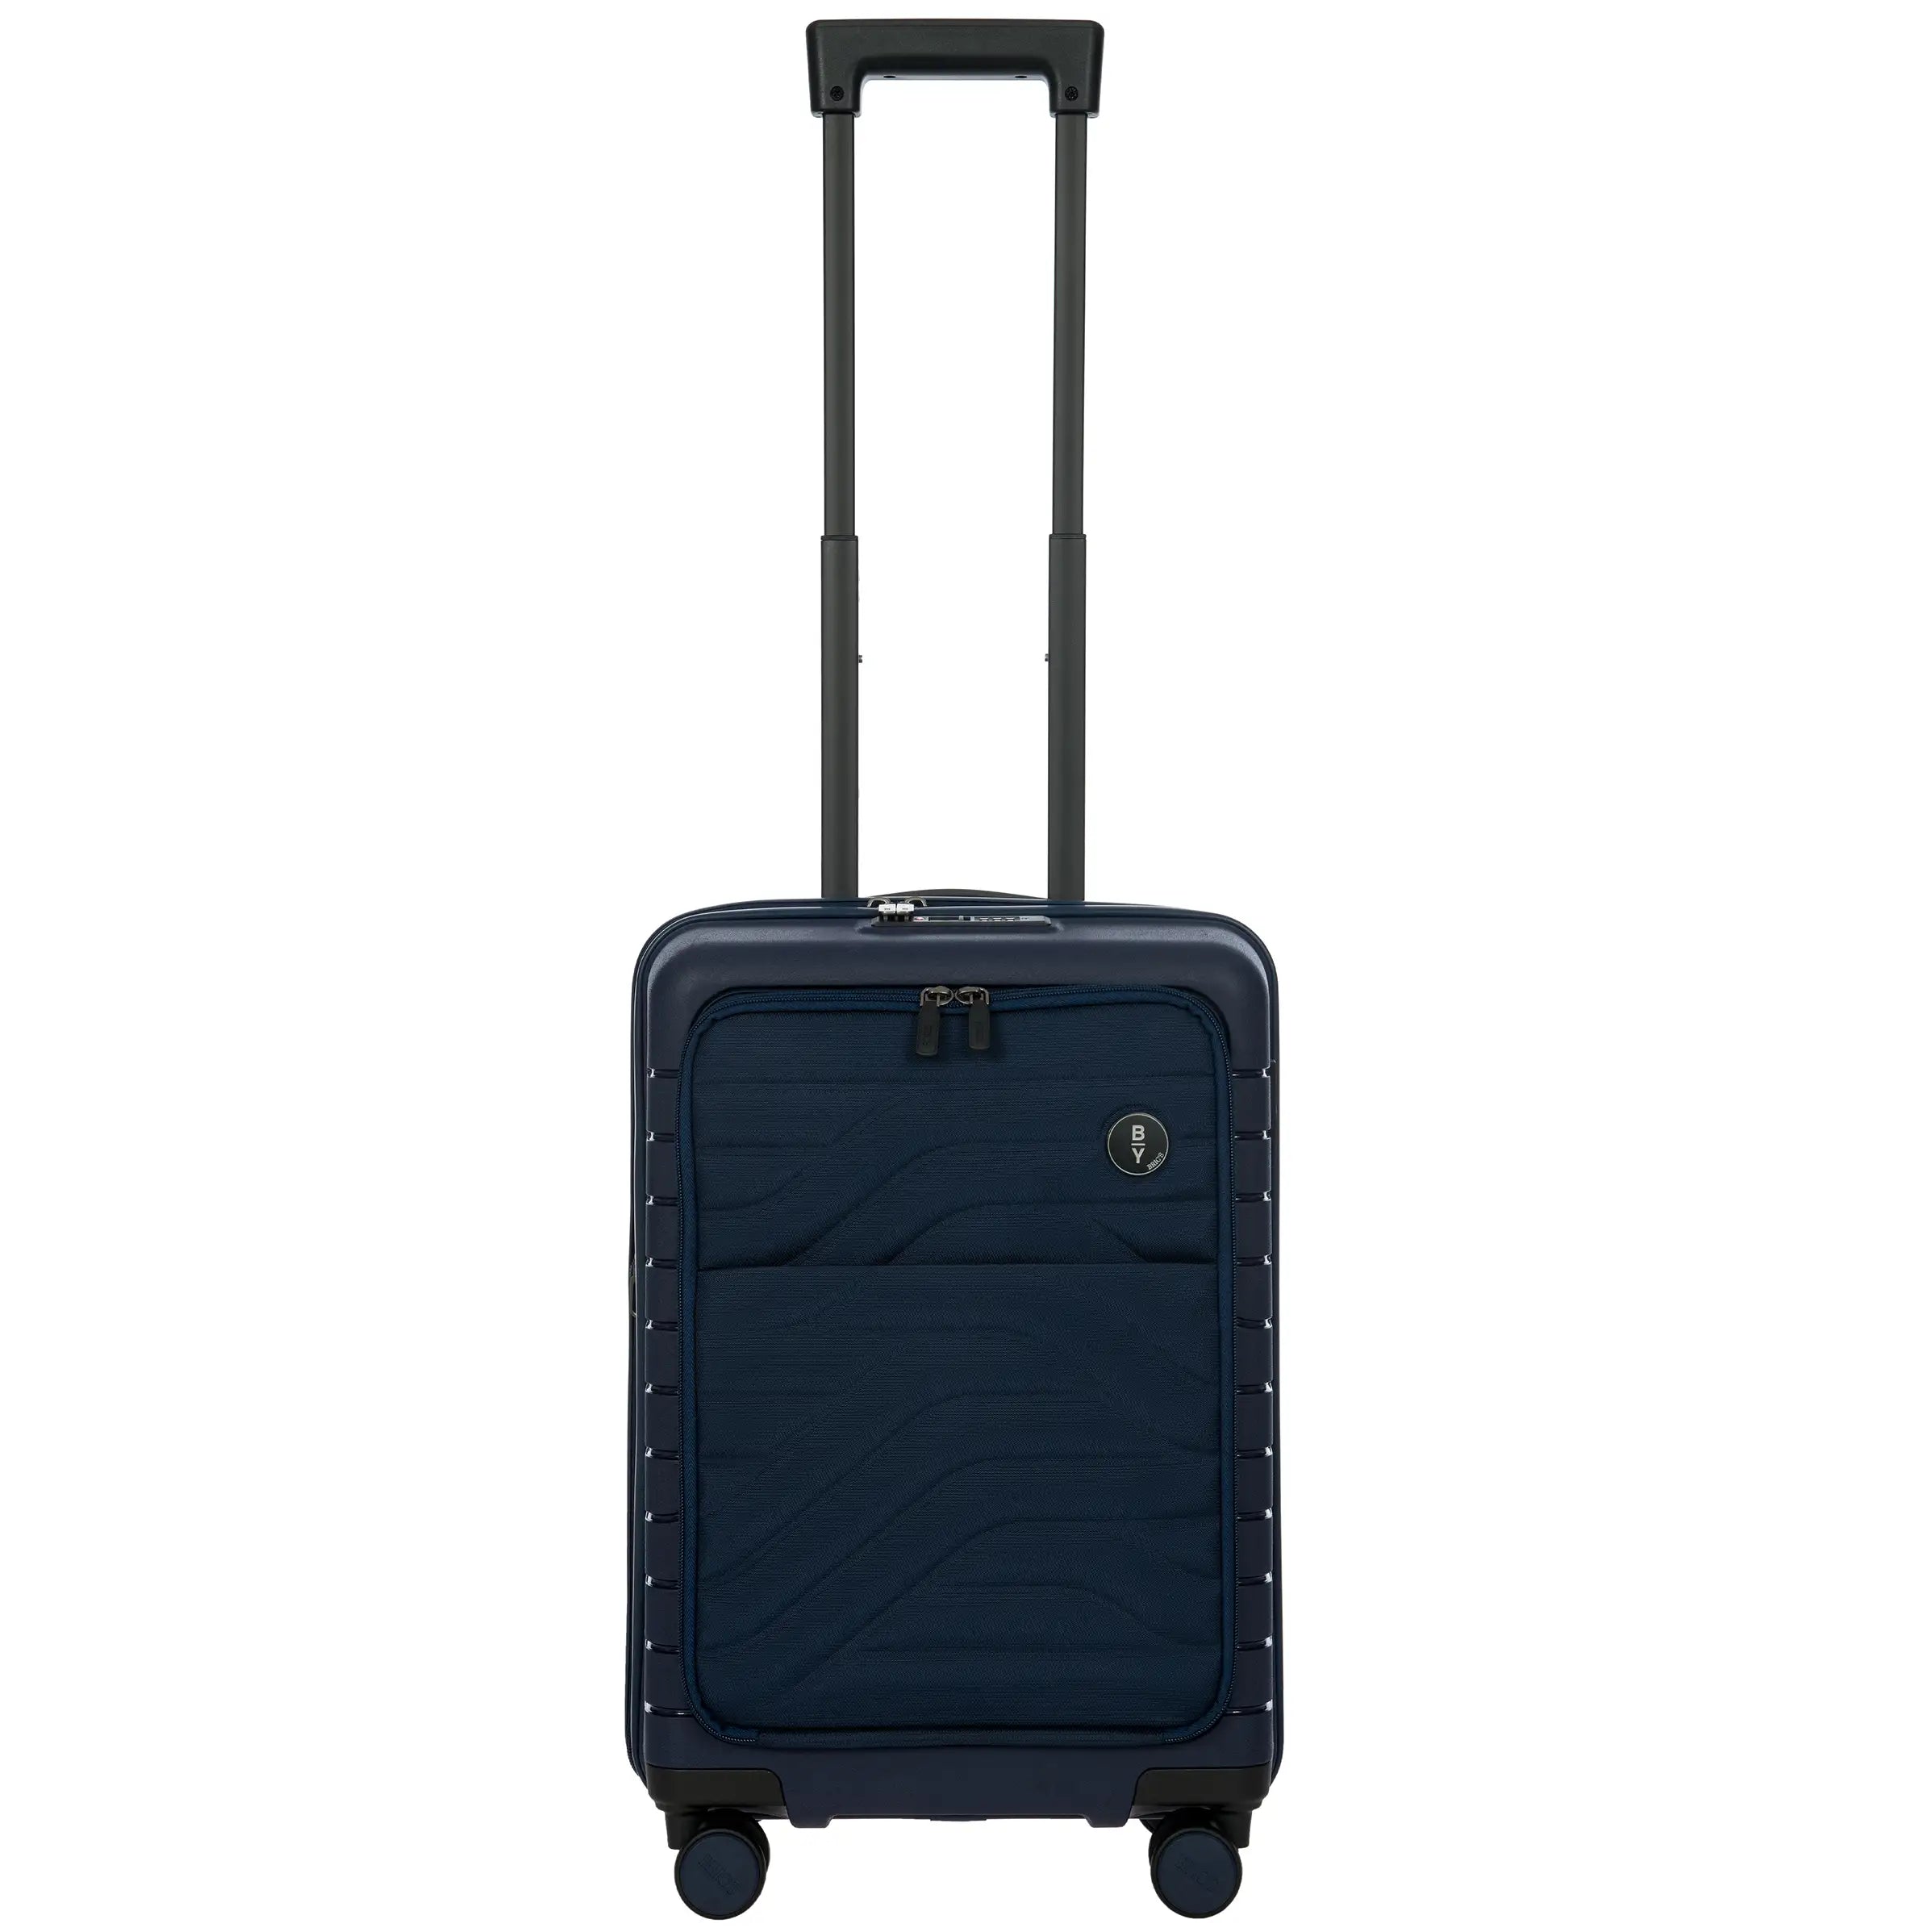 By by Brics Ulisse 4-wheel cabin trolley with front pocket 55 cm - Ocean Blue